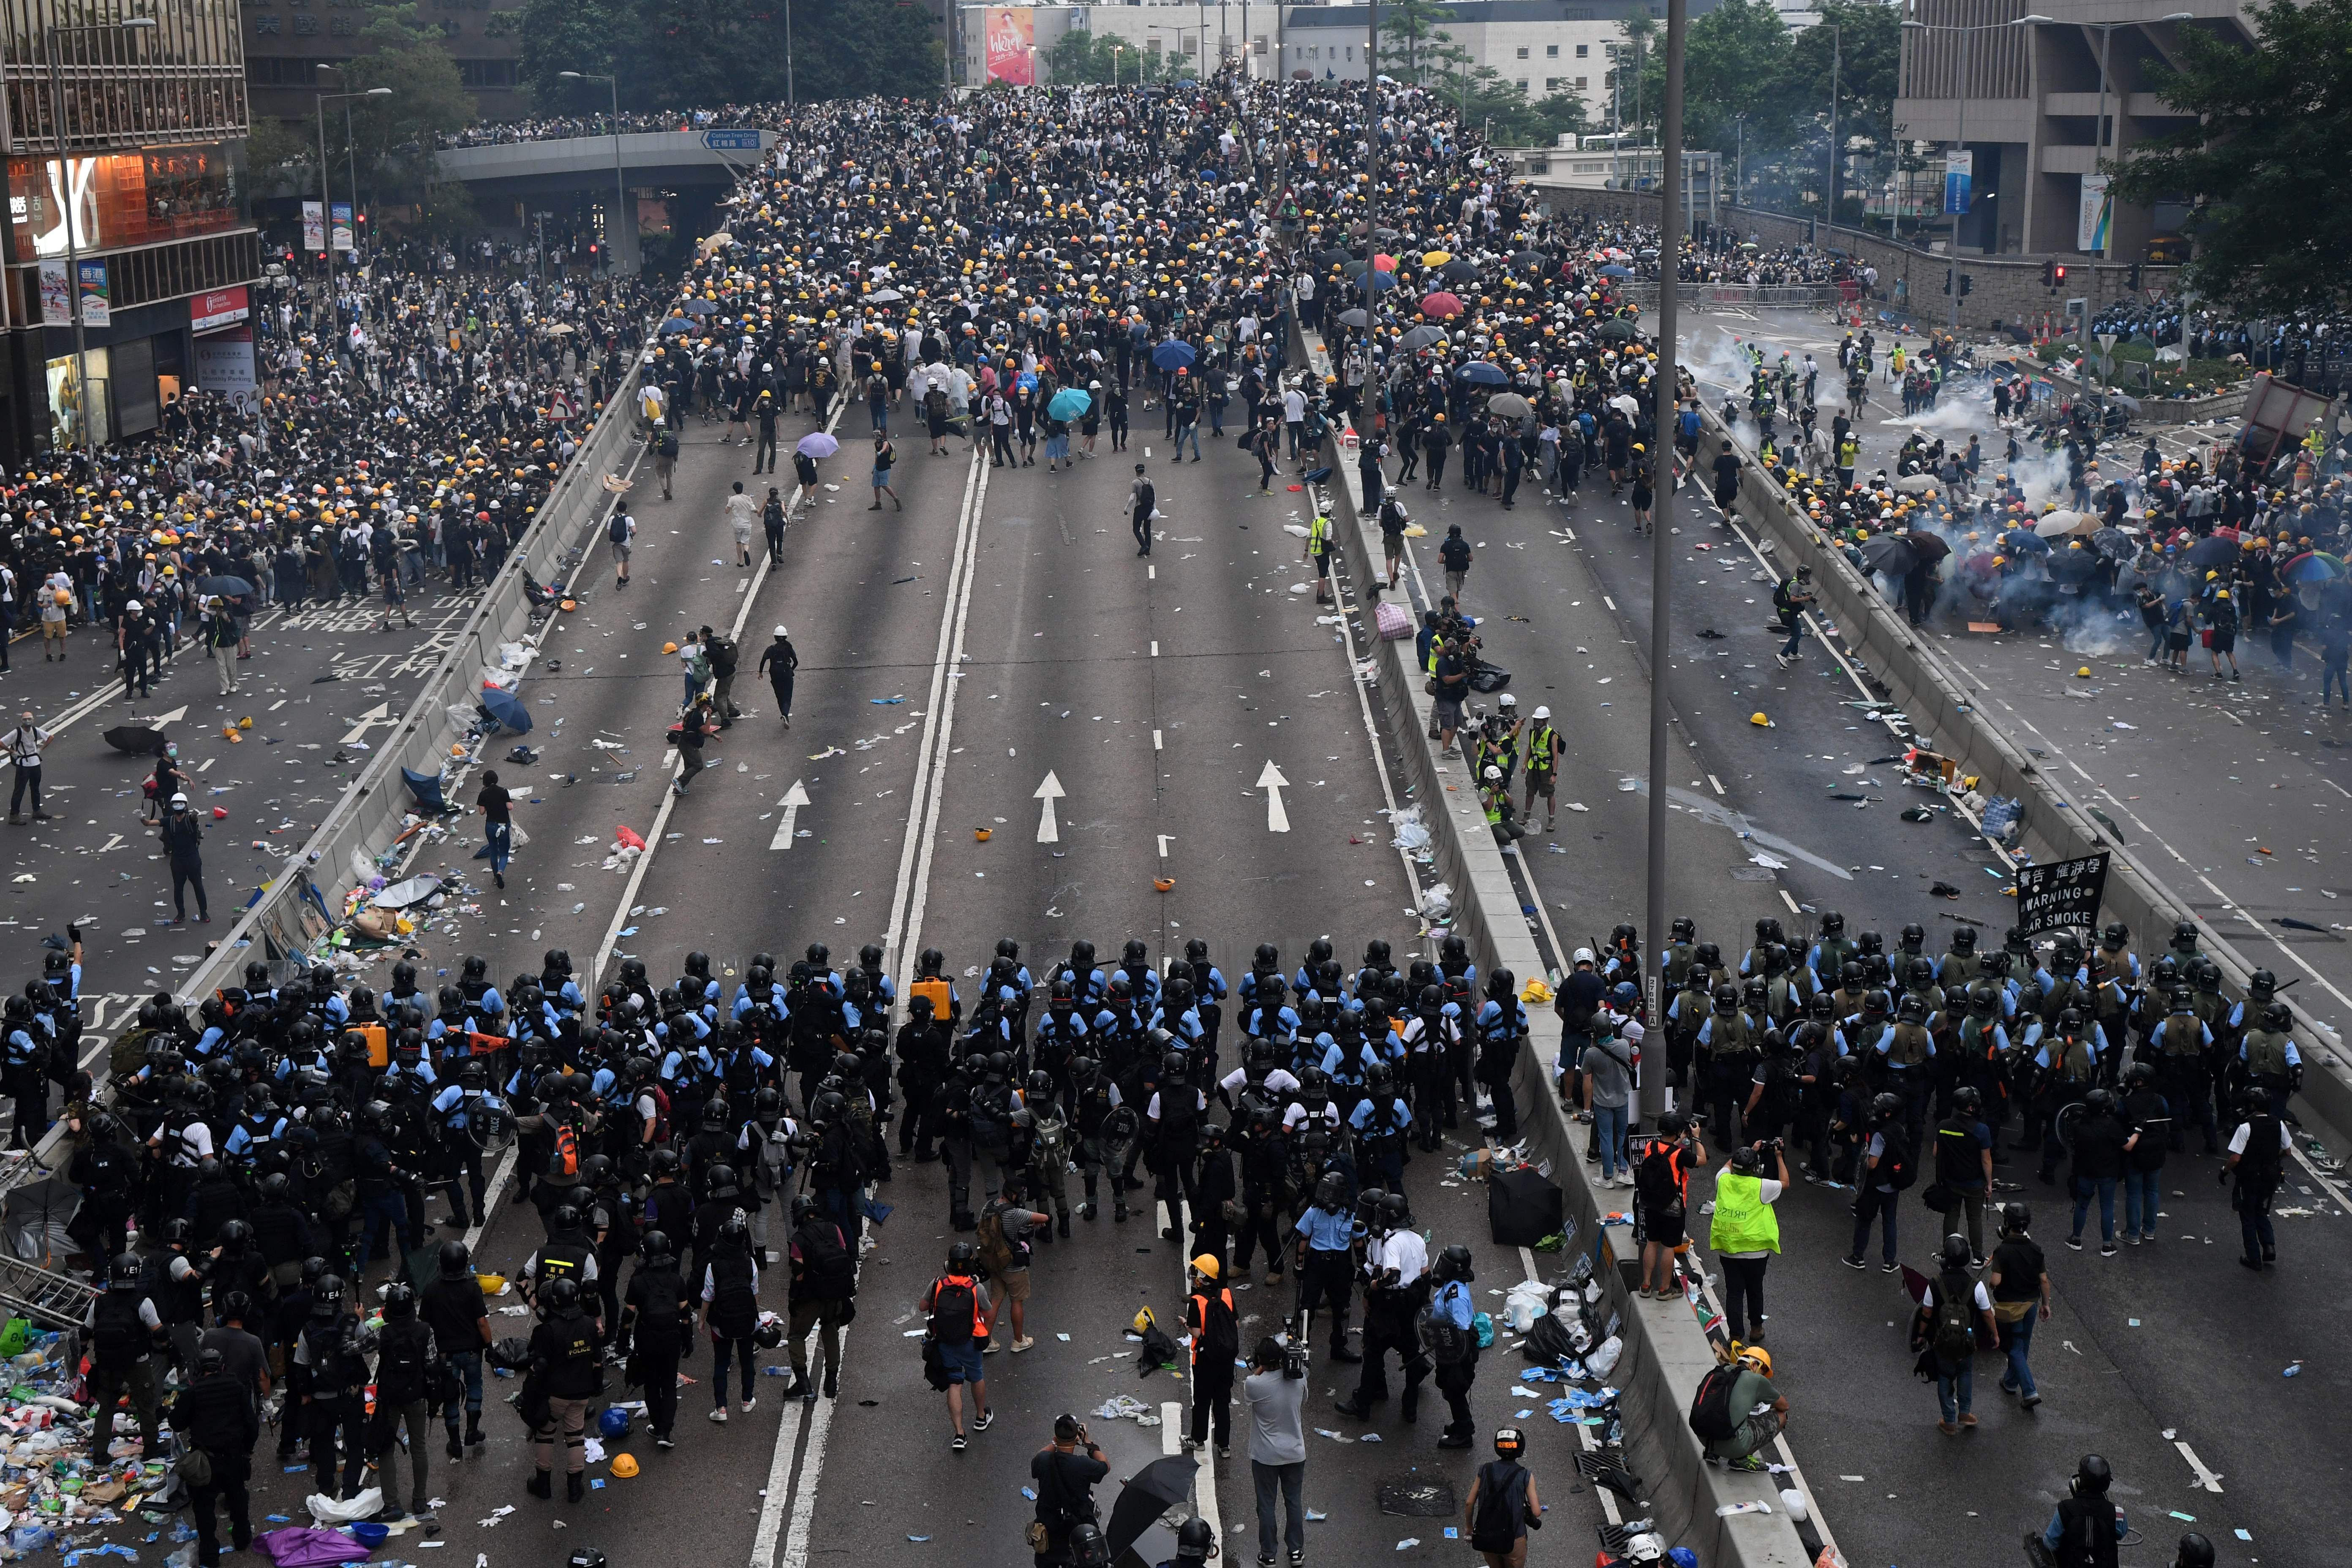 In this image, a line of protestors face a line of police on a road in Hong Kong.